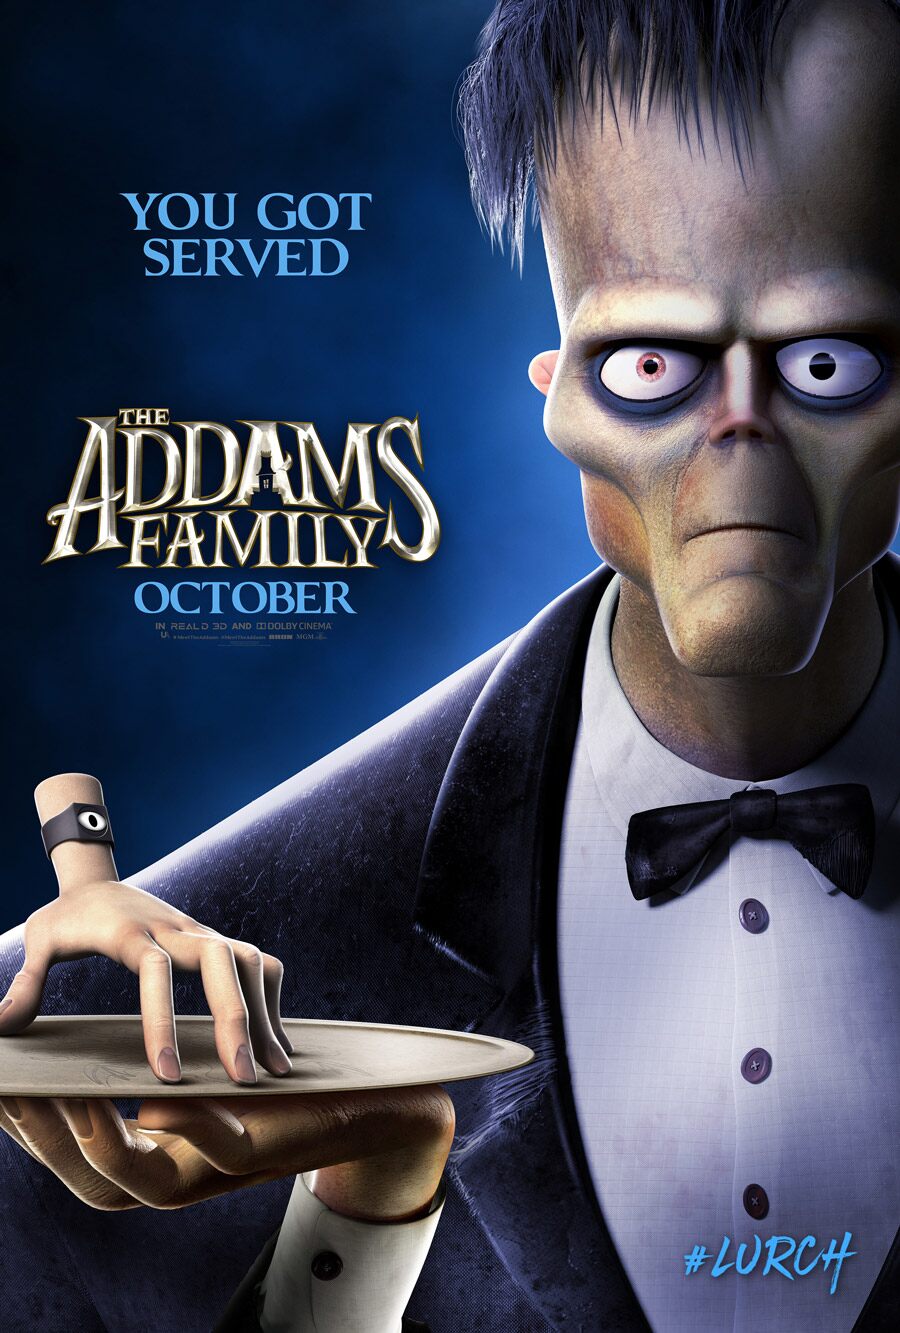 First Look at the New Animated Addams Family Movie!